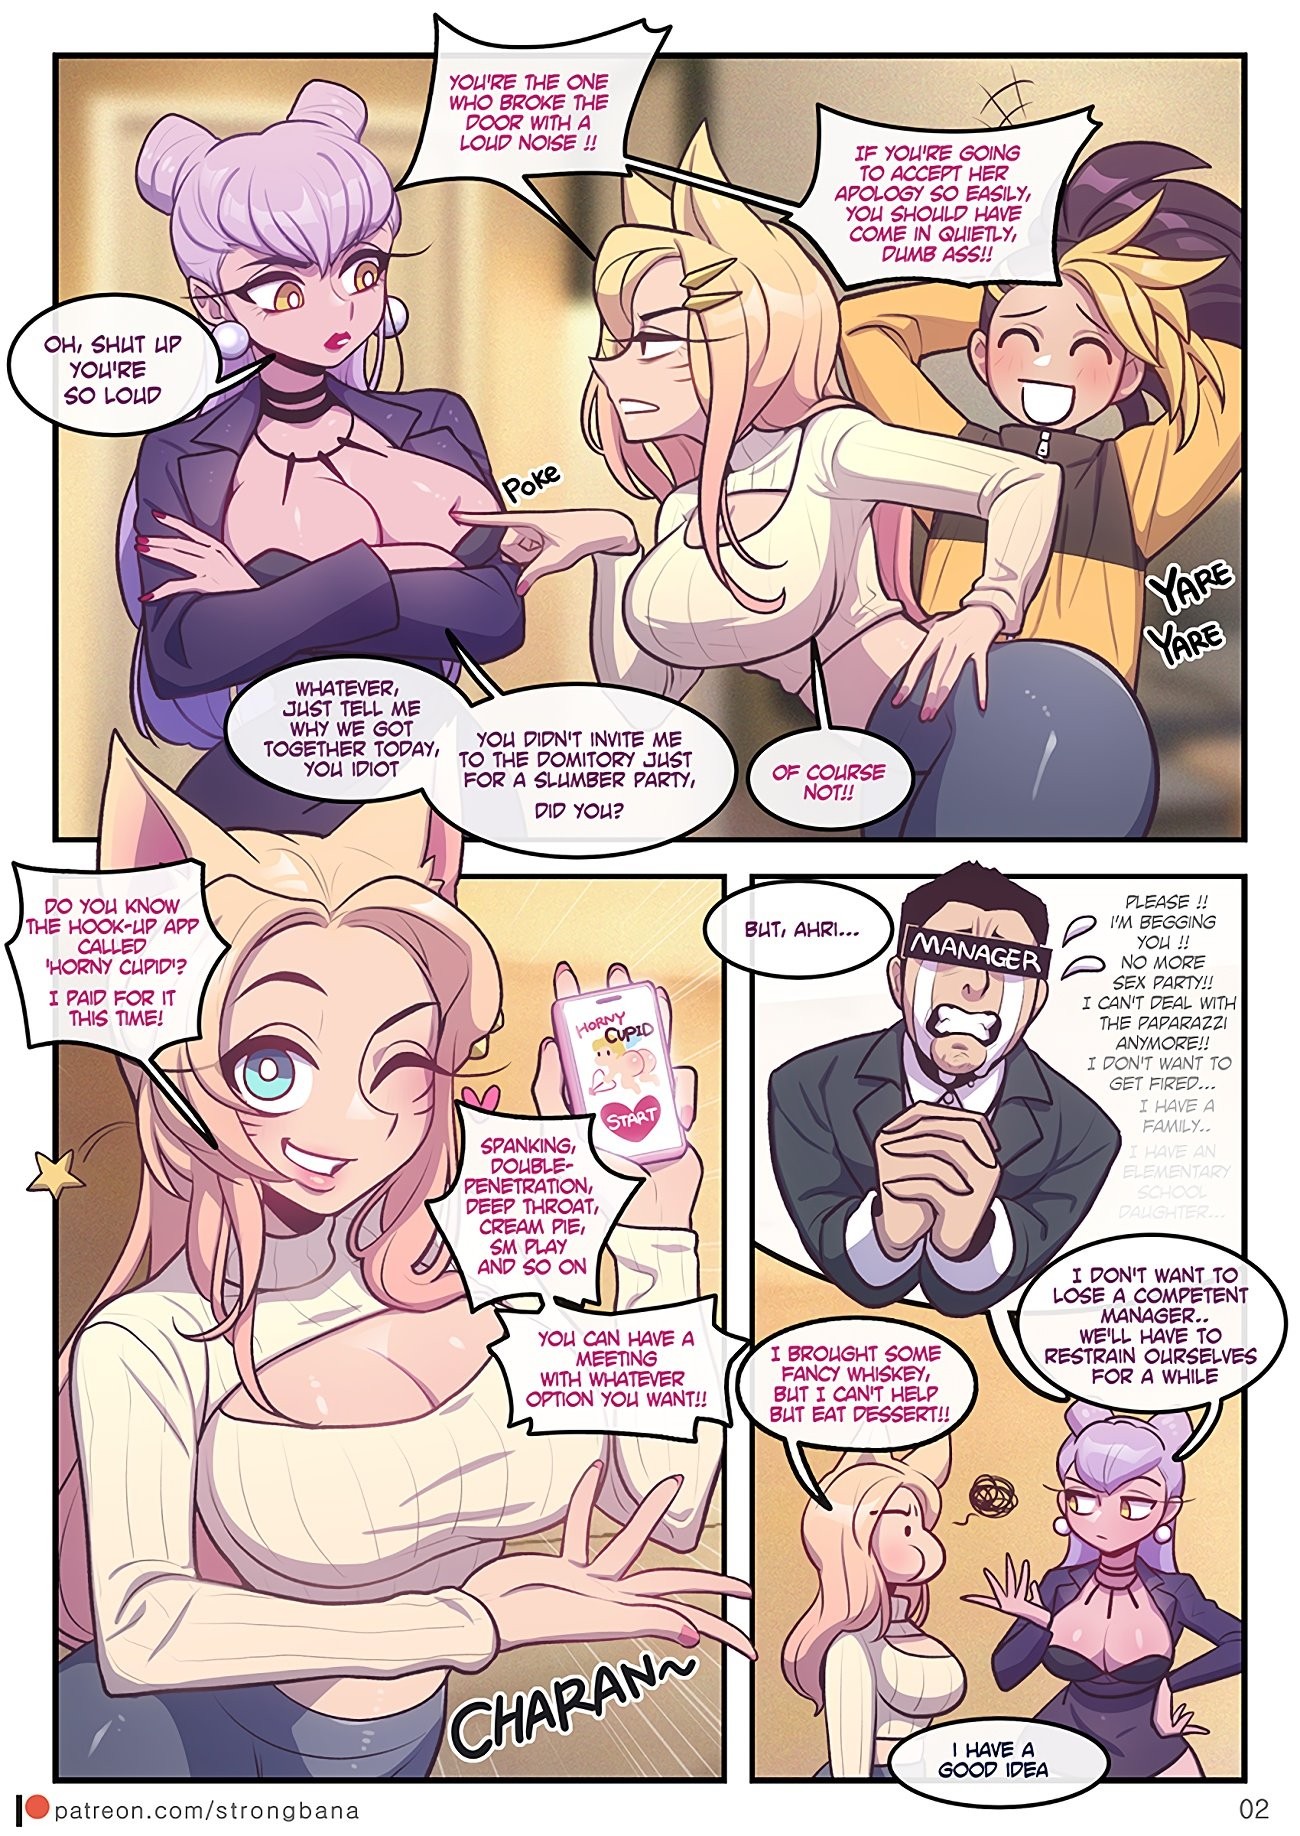 Strong Bana - Live Streaming (League of Legends) porn comic picture 4